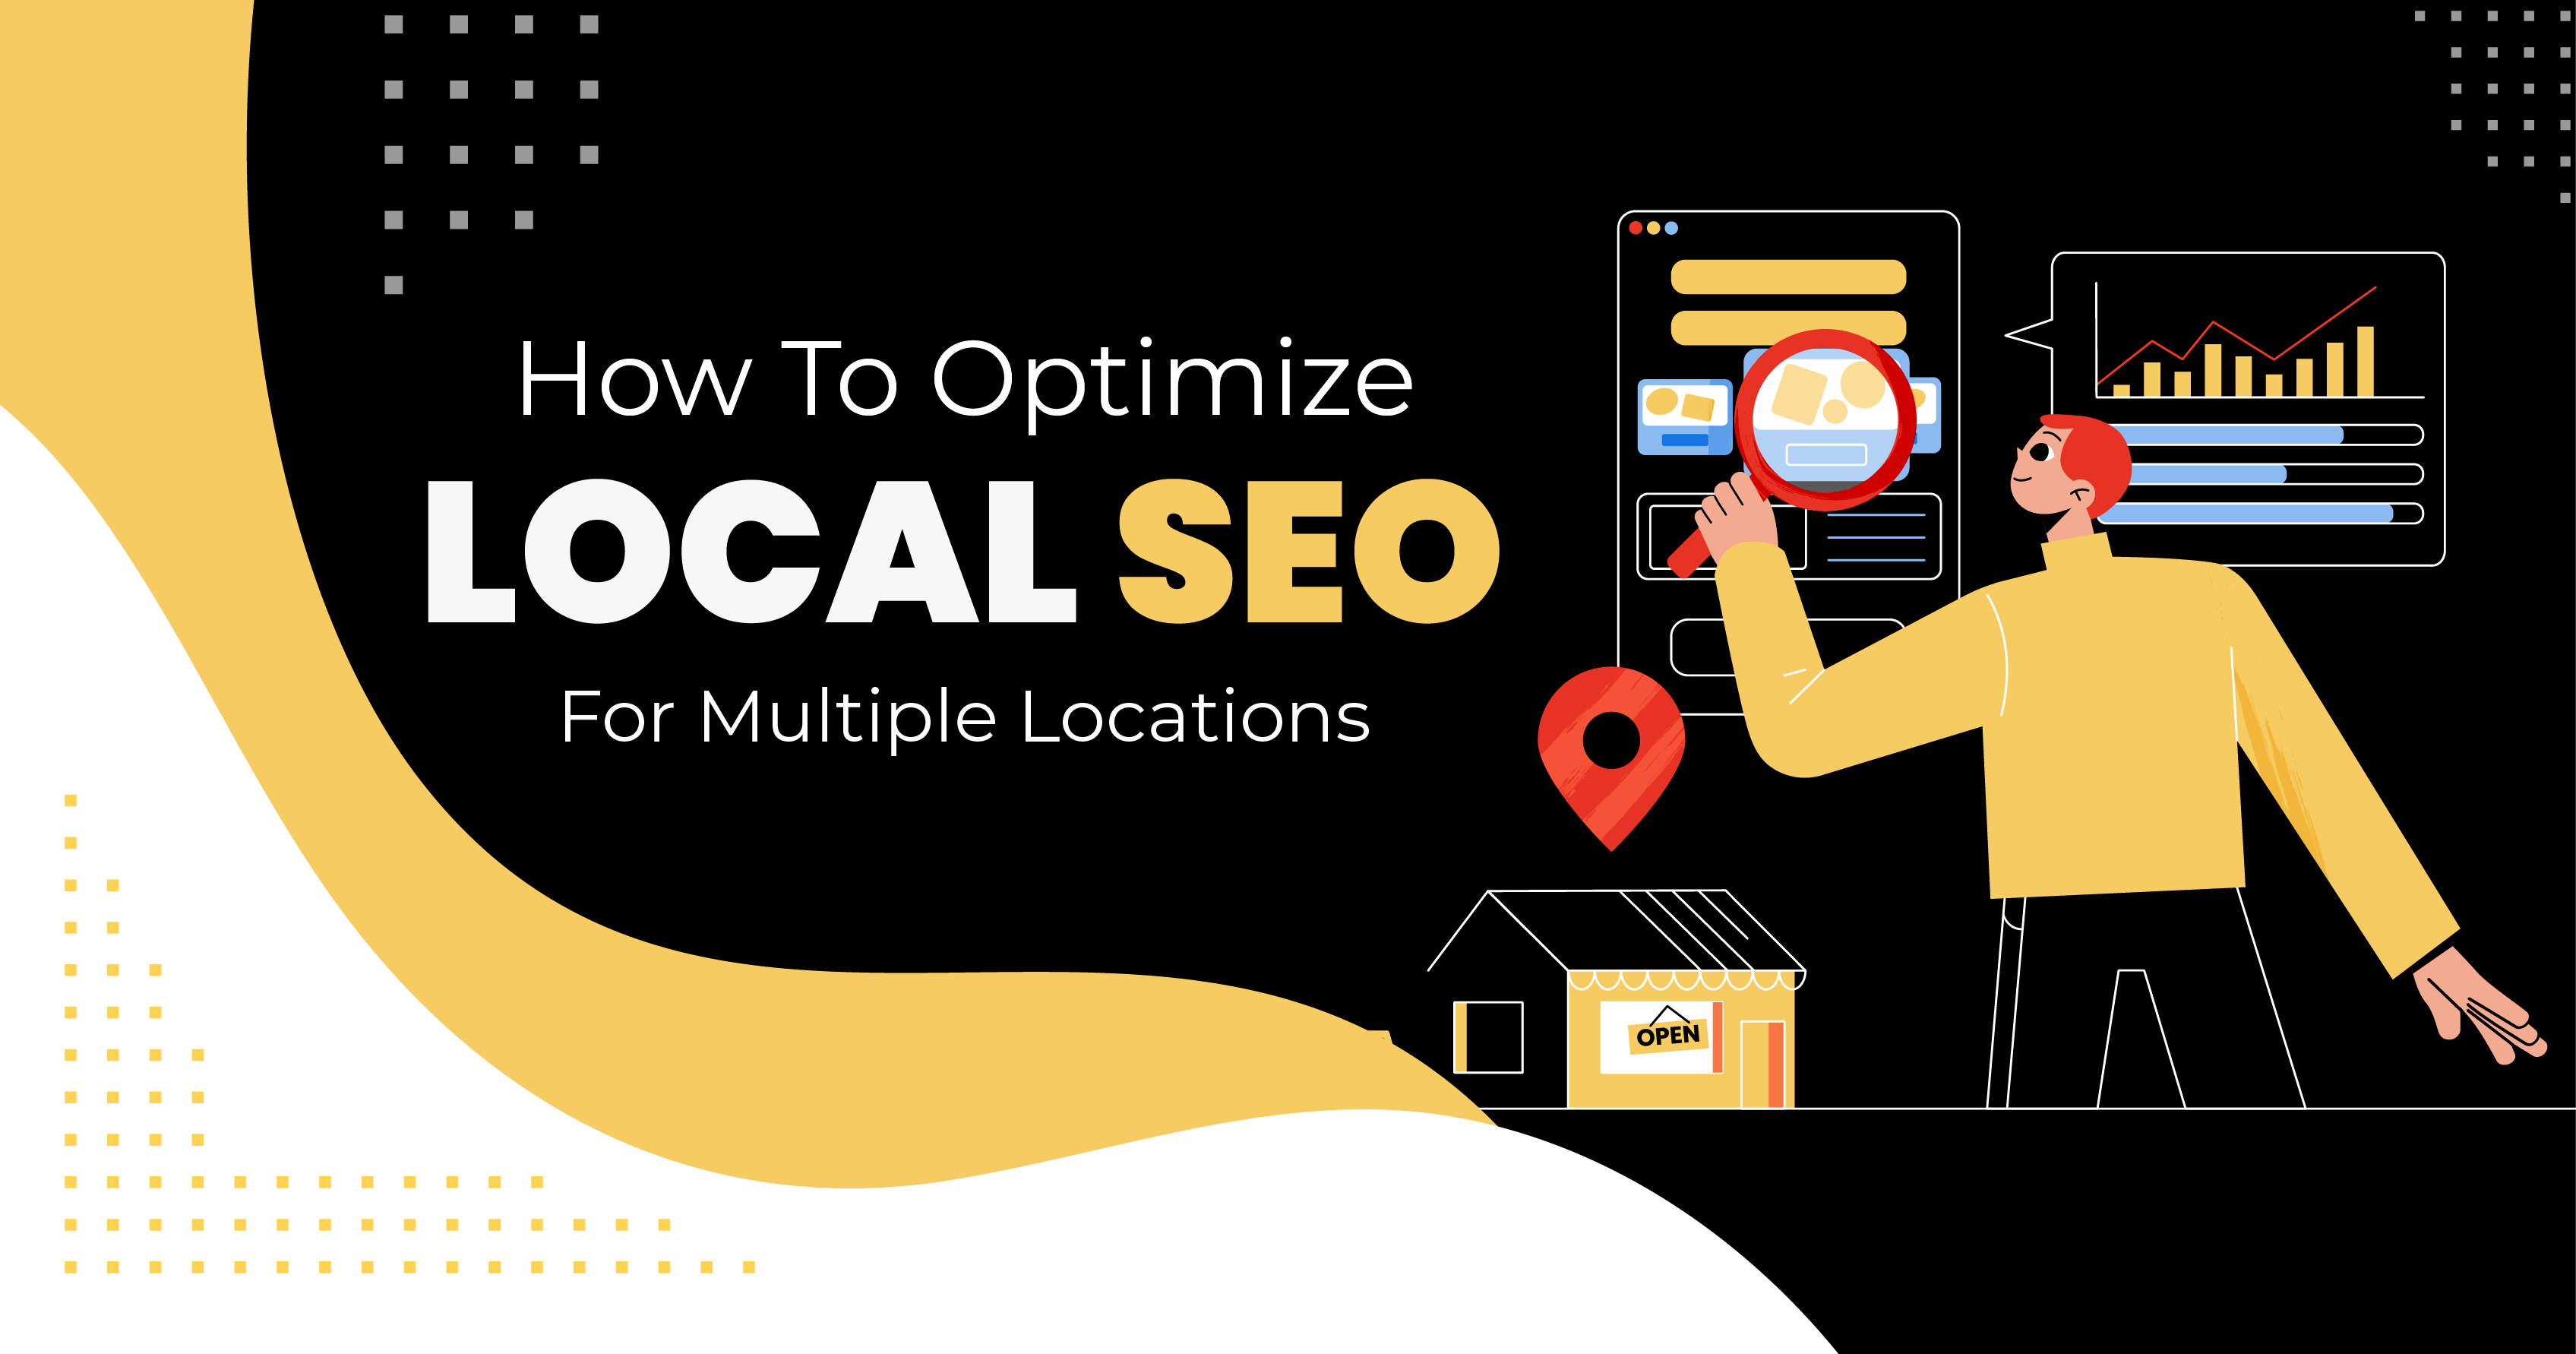 Optimize Local SEO for multiple locations